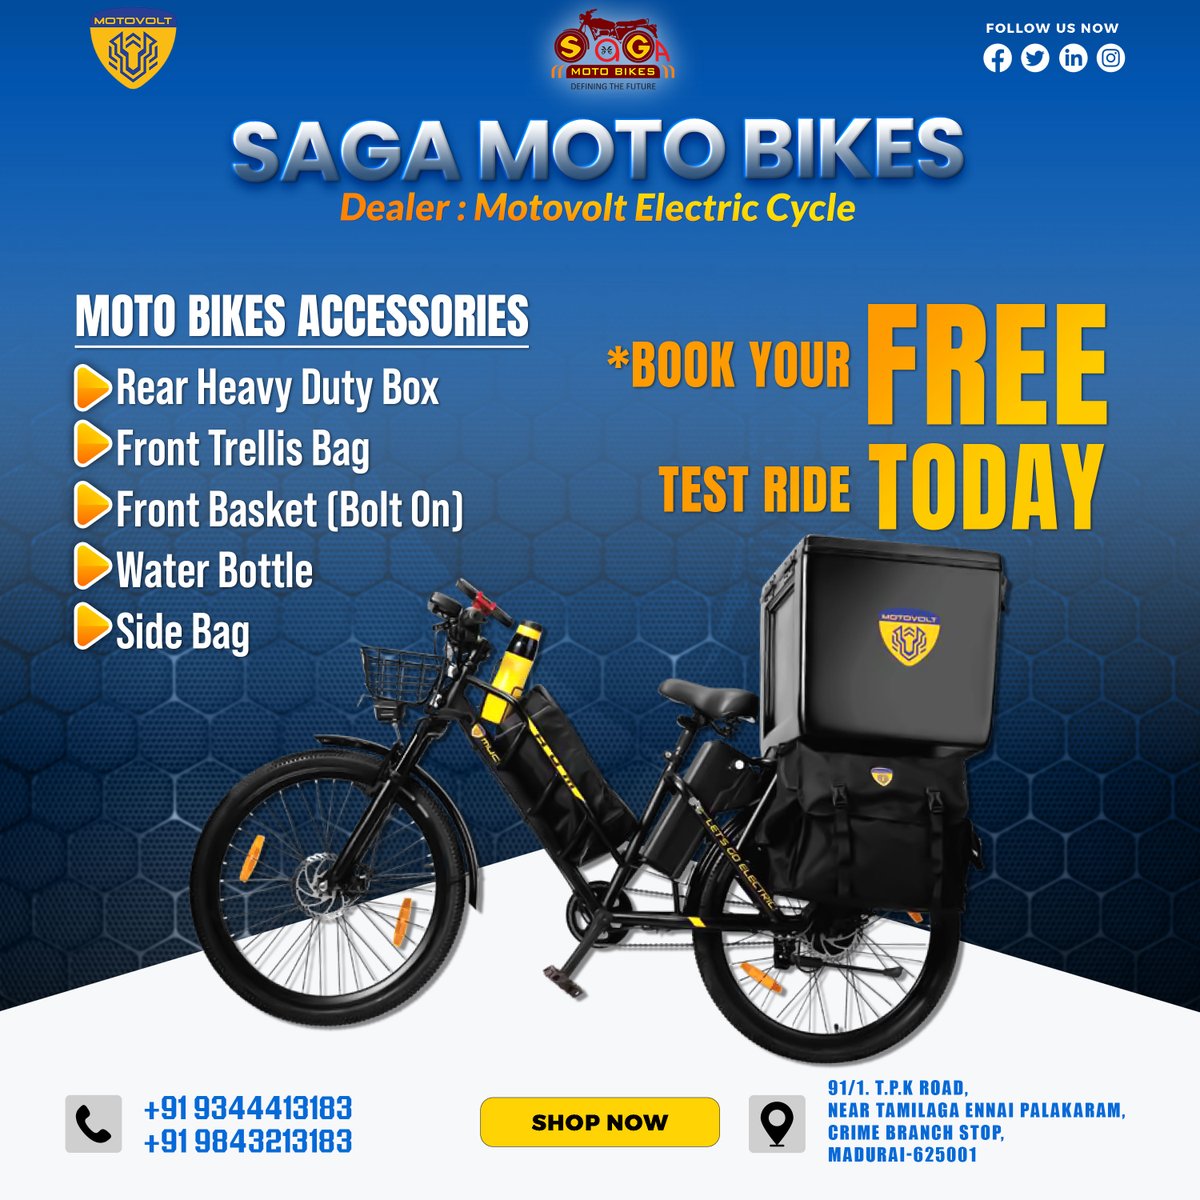 Moto Bikes Accessories - Motovolt Electric Cycle - Saga Moto Bikes #battery #ecycle #cycles #madurai #dealer #pedalassistmode #premium #EnergyStorage #trending #assistedbiking #rearheavydutybox #fronttrellisbag #Frontbasketbolton #Waterbottle #sidebag #trending #new #goodquality